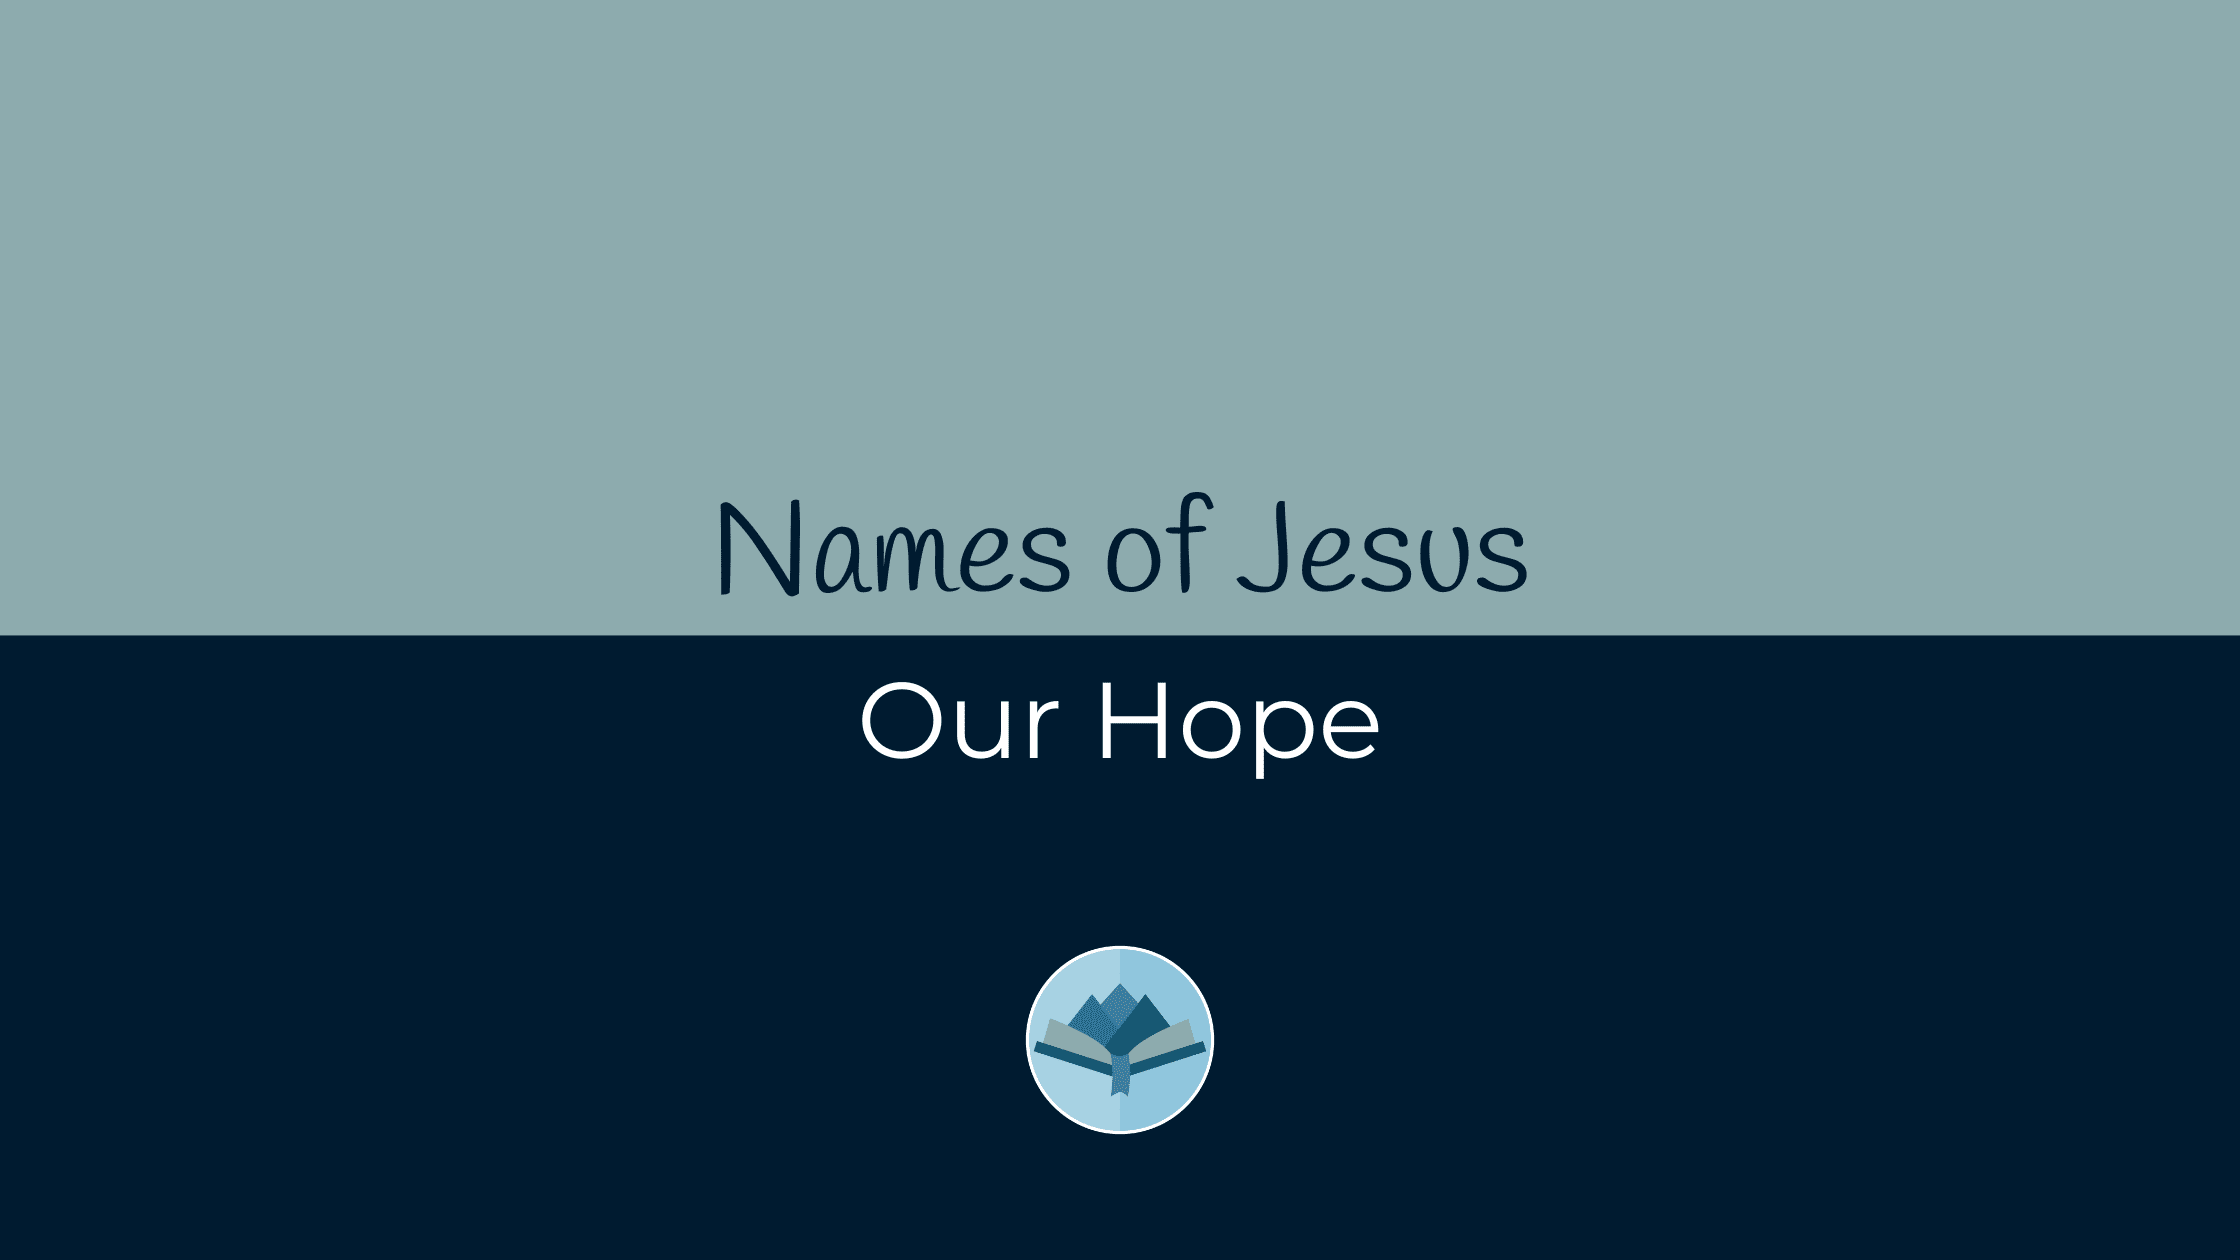 Names of Jesus: Our Hope